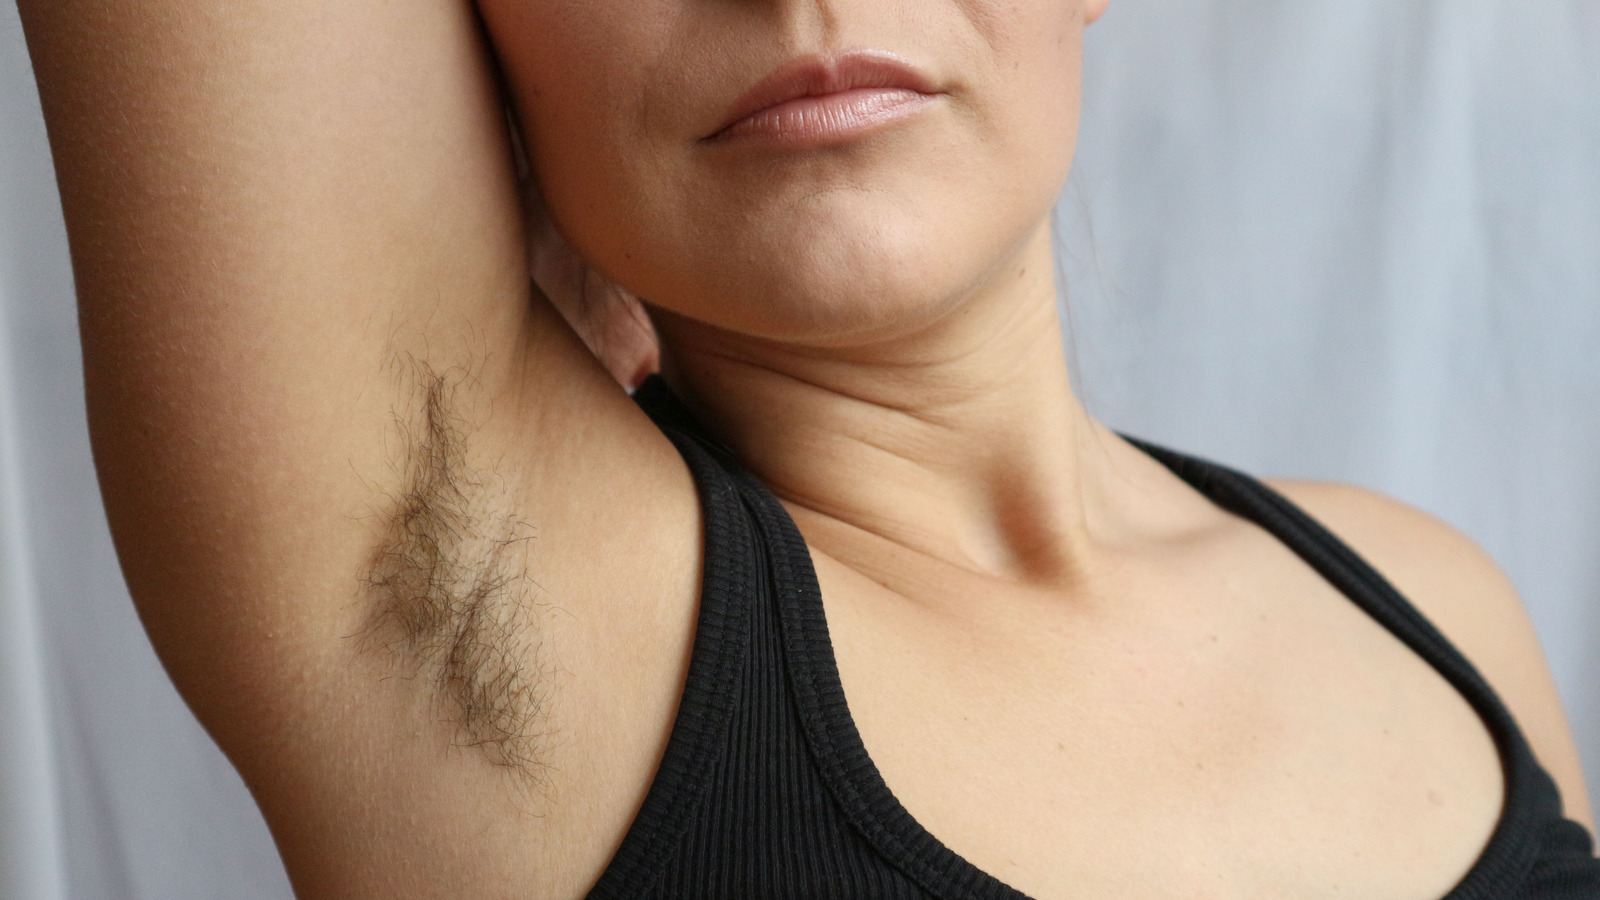 Hairy armpit shaving while topless preview best adult free pictures